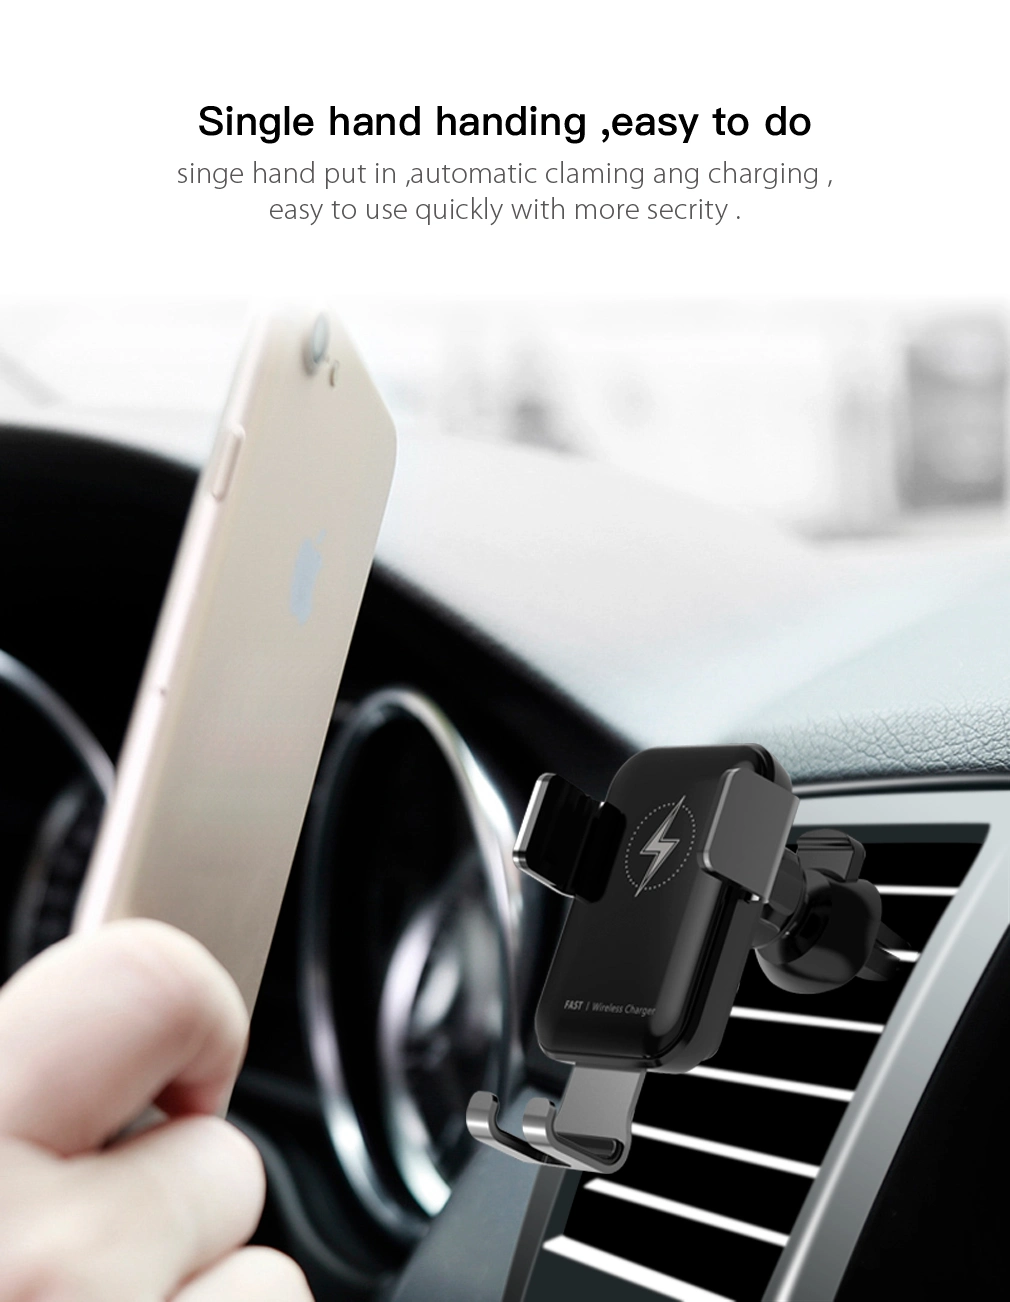 15W Max. Qi Wireless Charger Portable Wireless Car Charger iPhone Best Wireless Car Charger Car Automatic Sensor Car Phone Holder and Charger